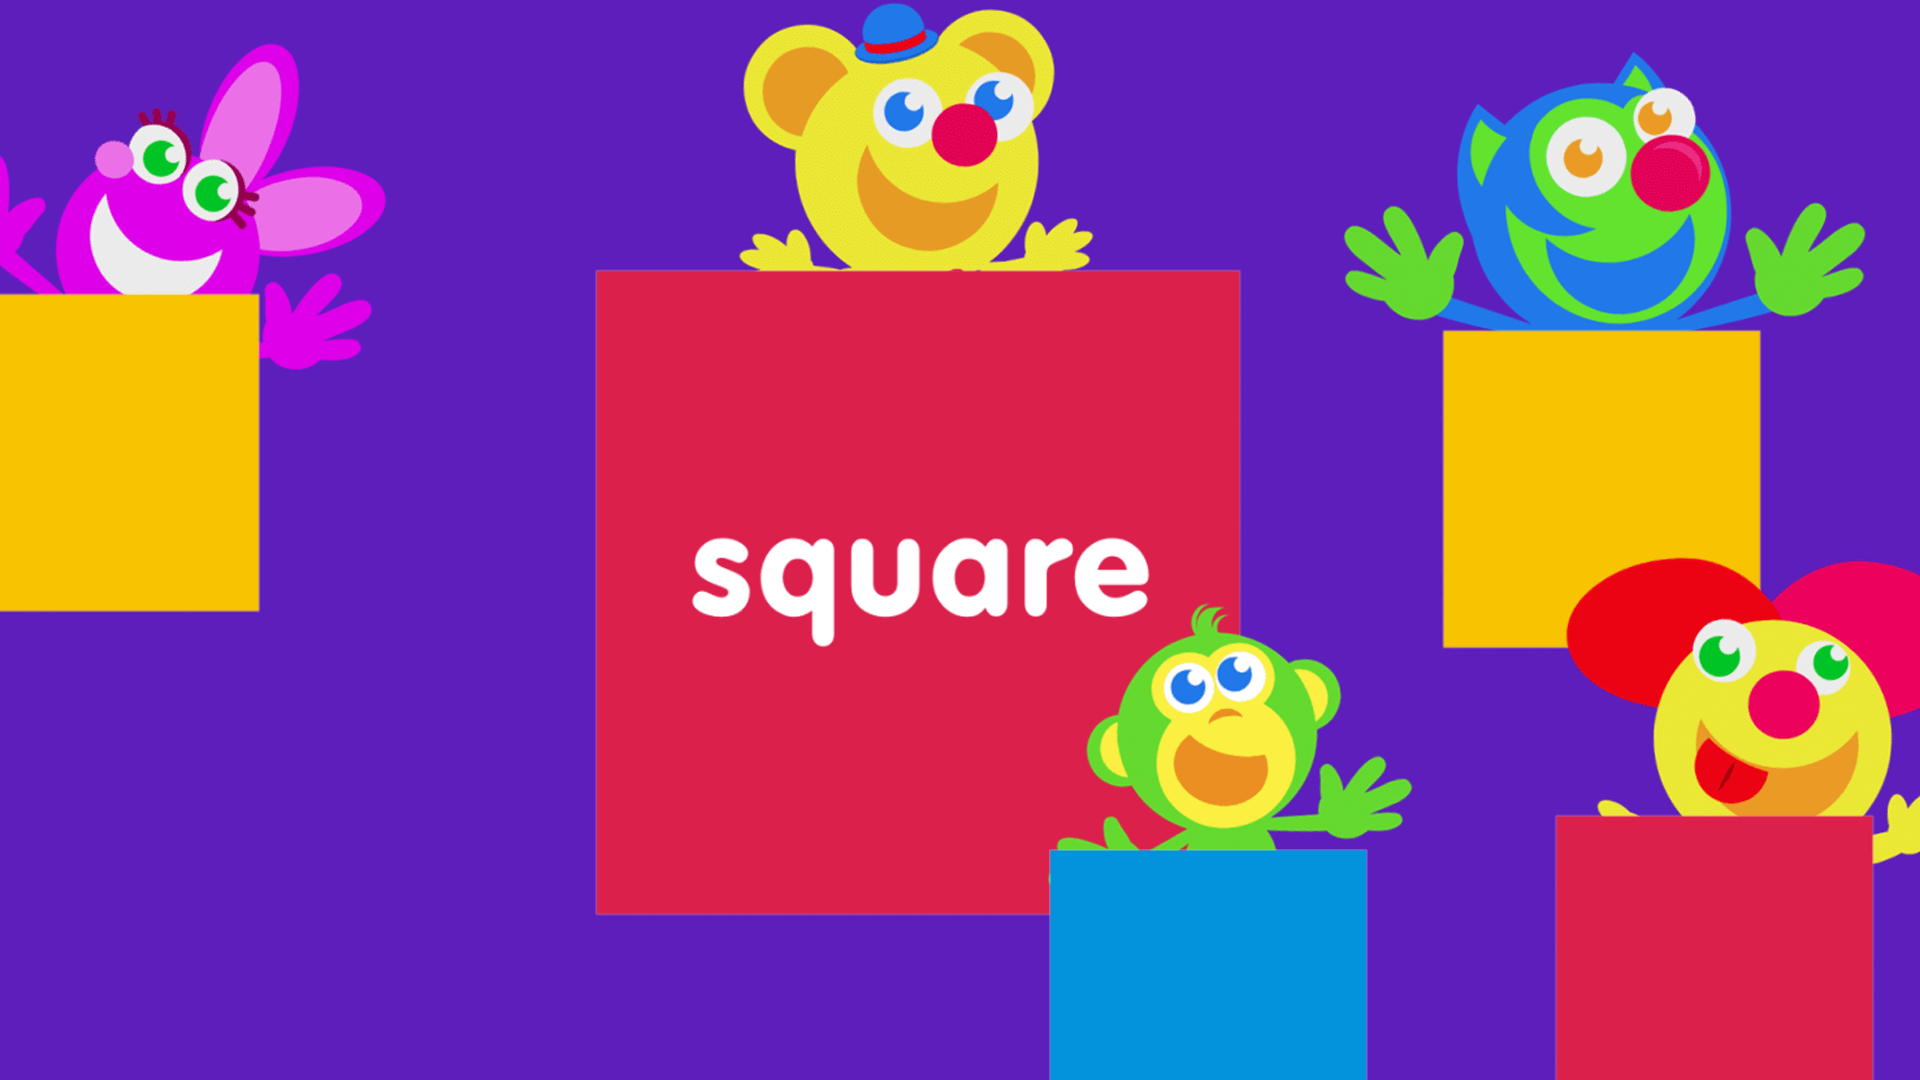 learn shapes, game for baby, game for toddlers